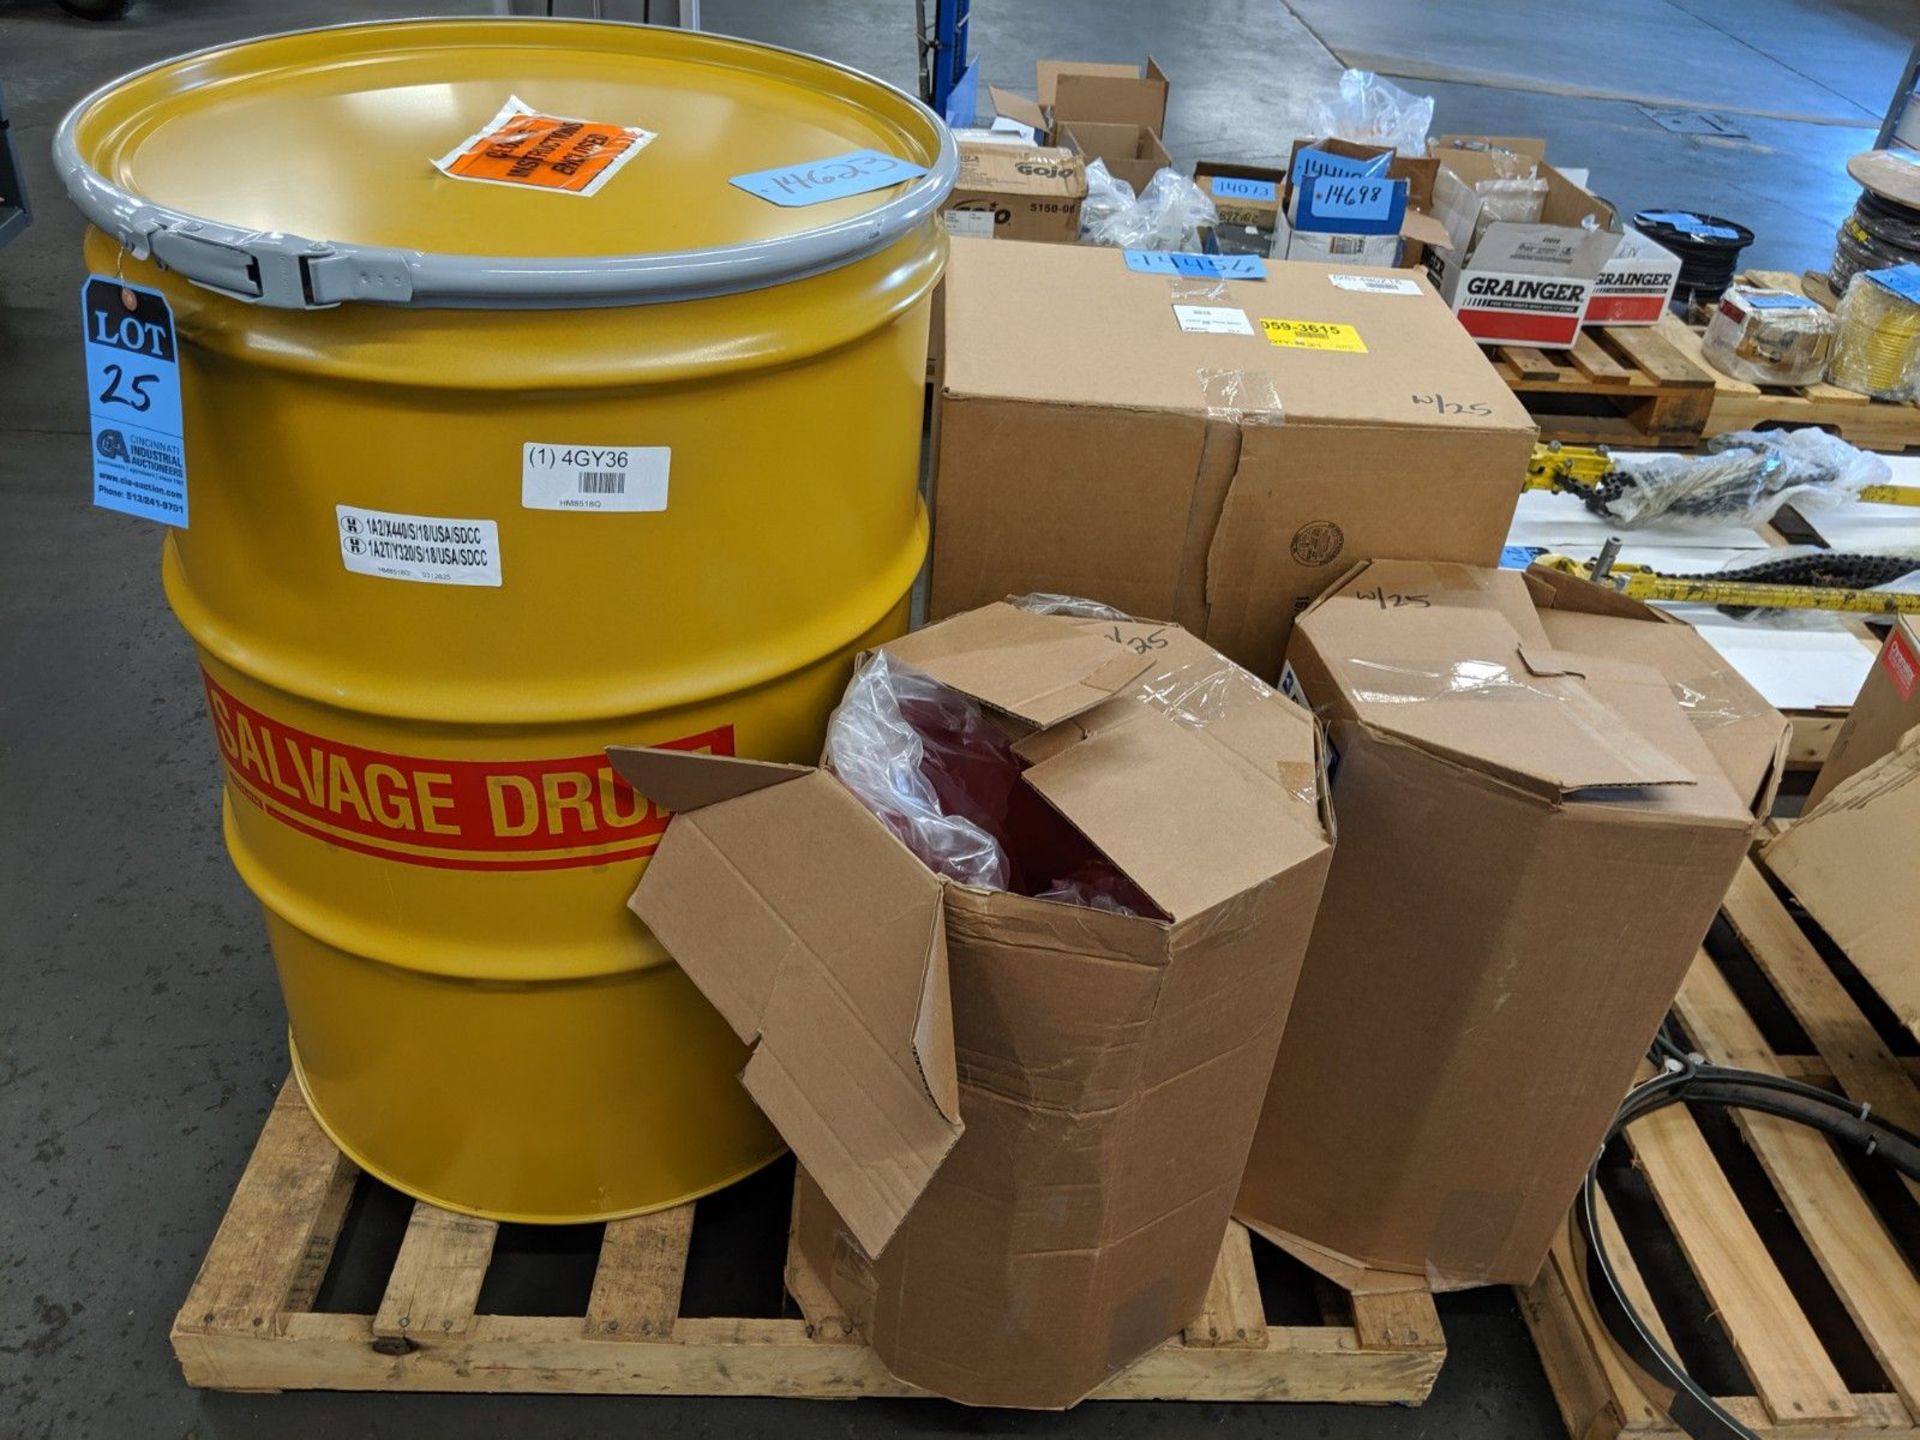 50 GALLON SALVAGE DRUM WITH DRUM LINERS (NEW)